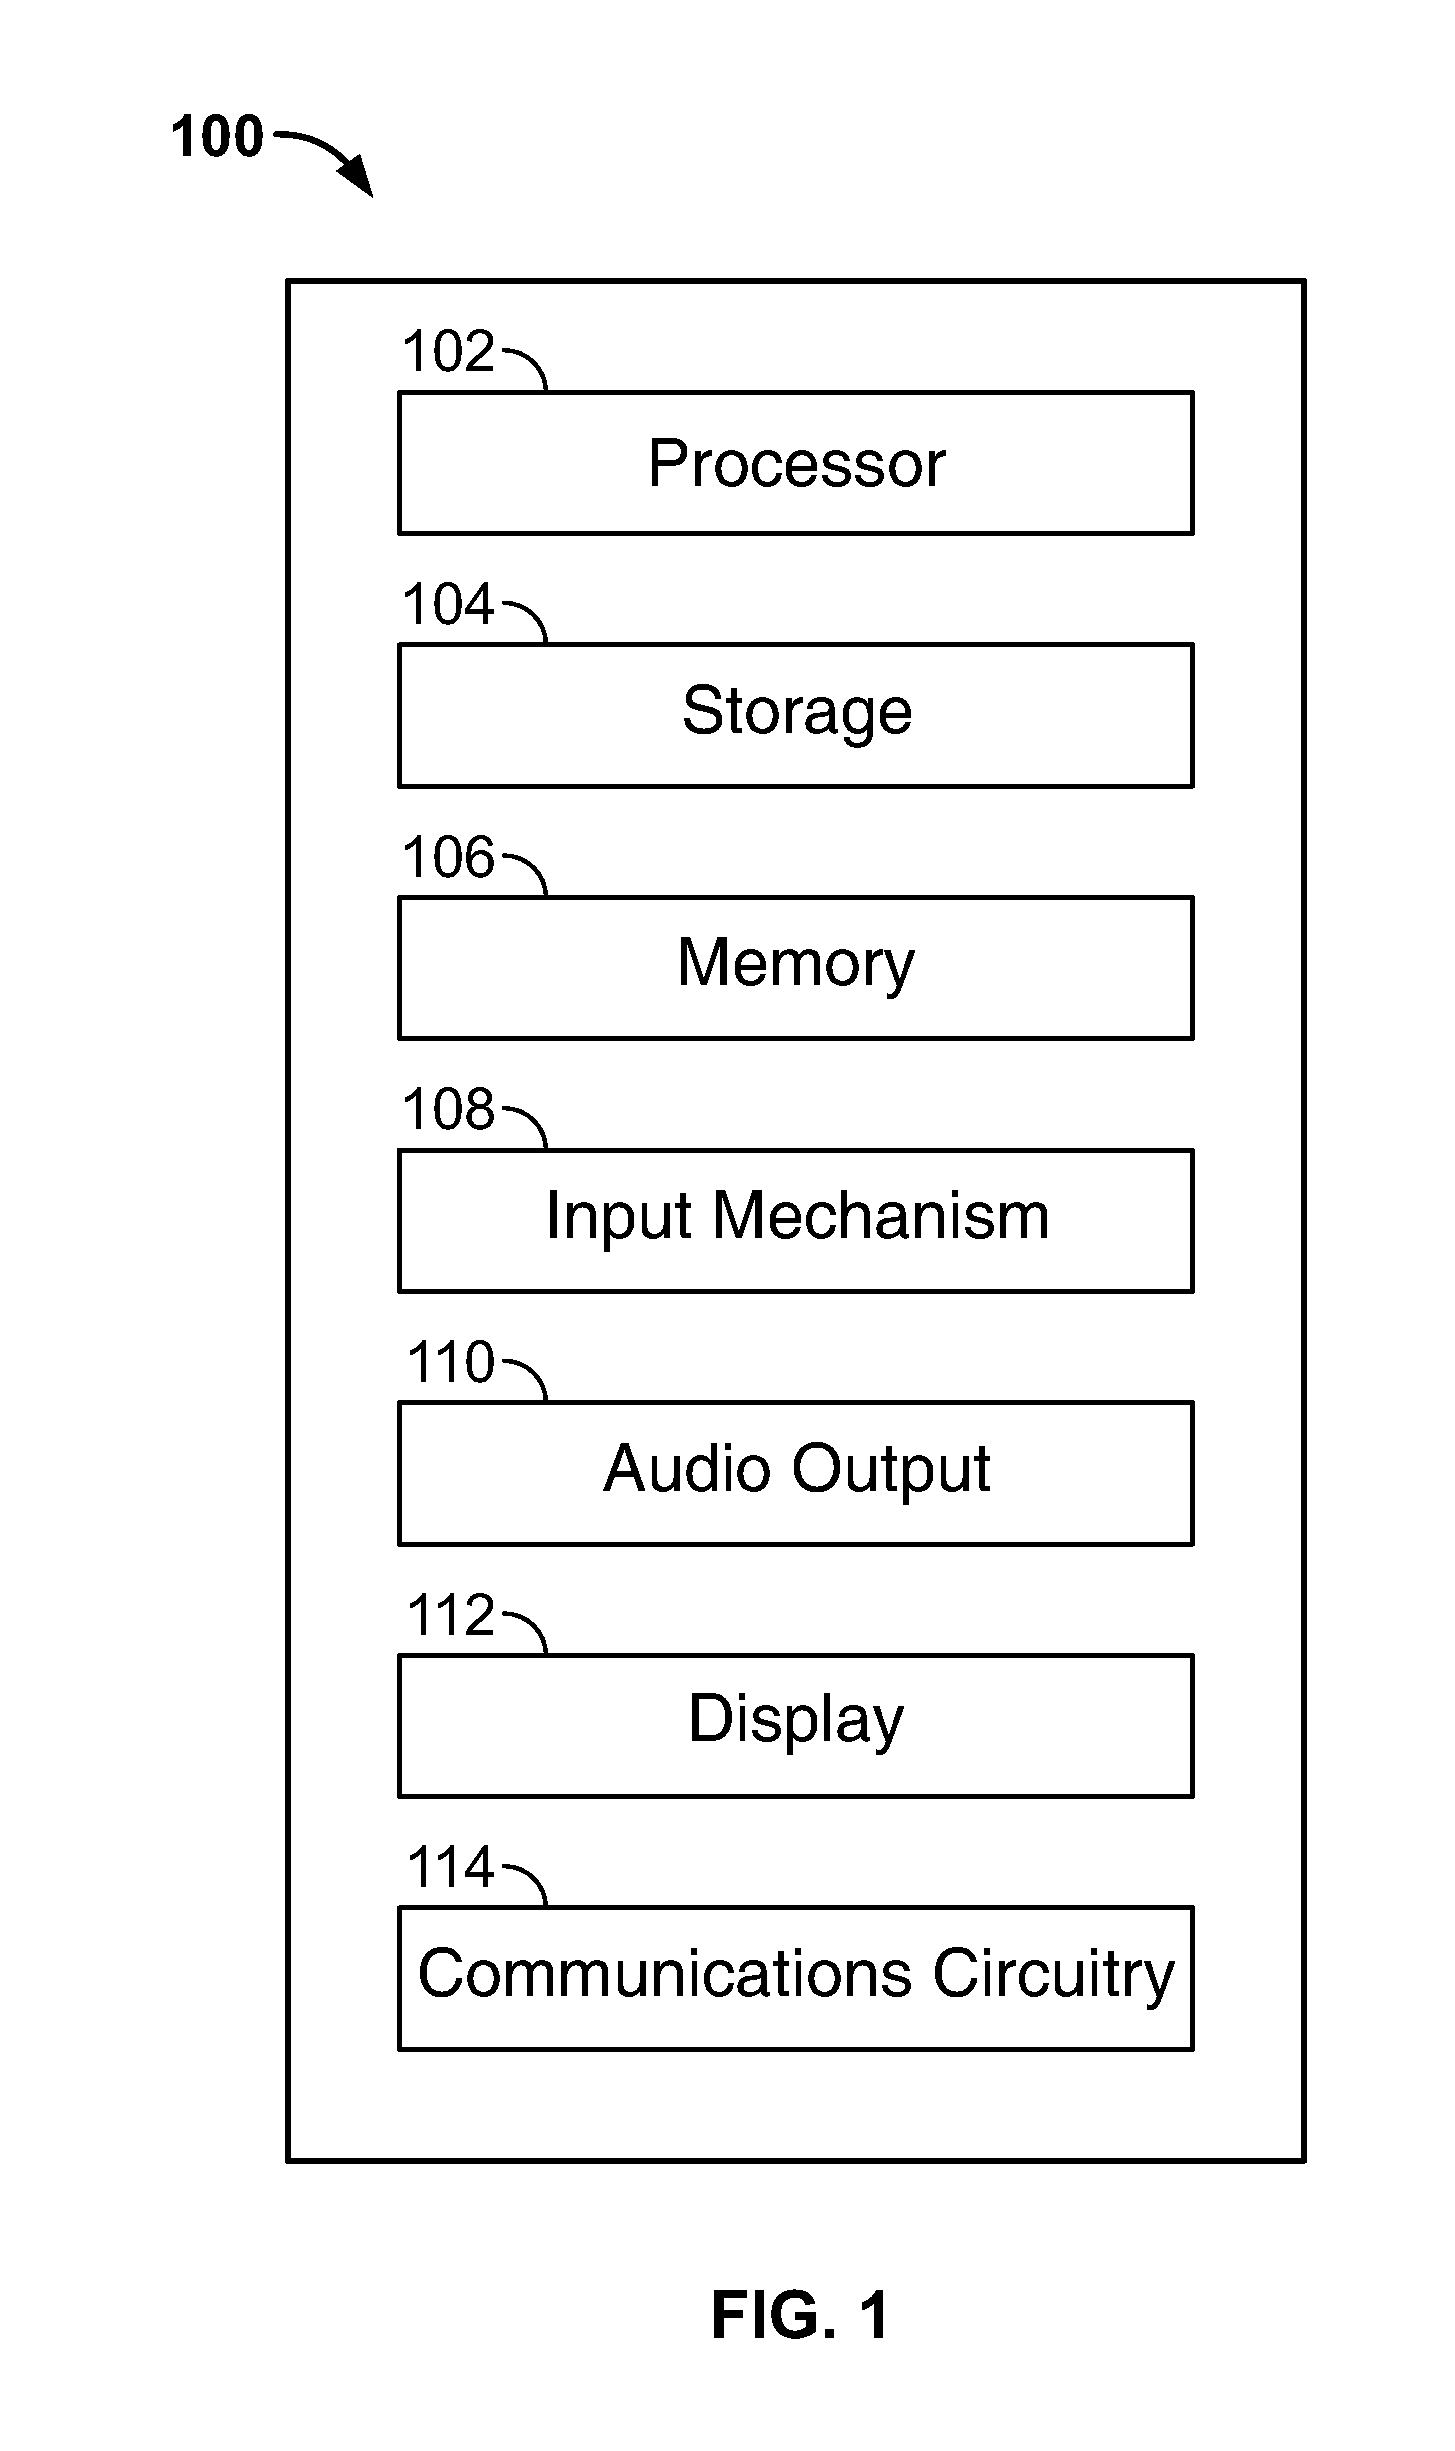 Multi-Tiered Voice Feedback in an Electronic Device